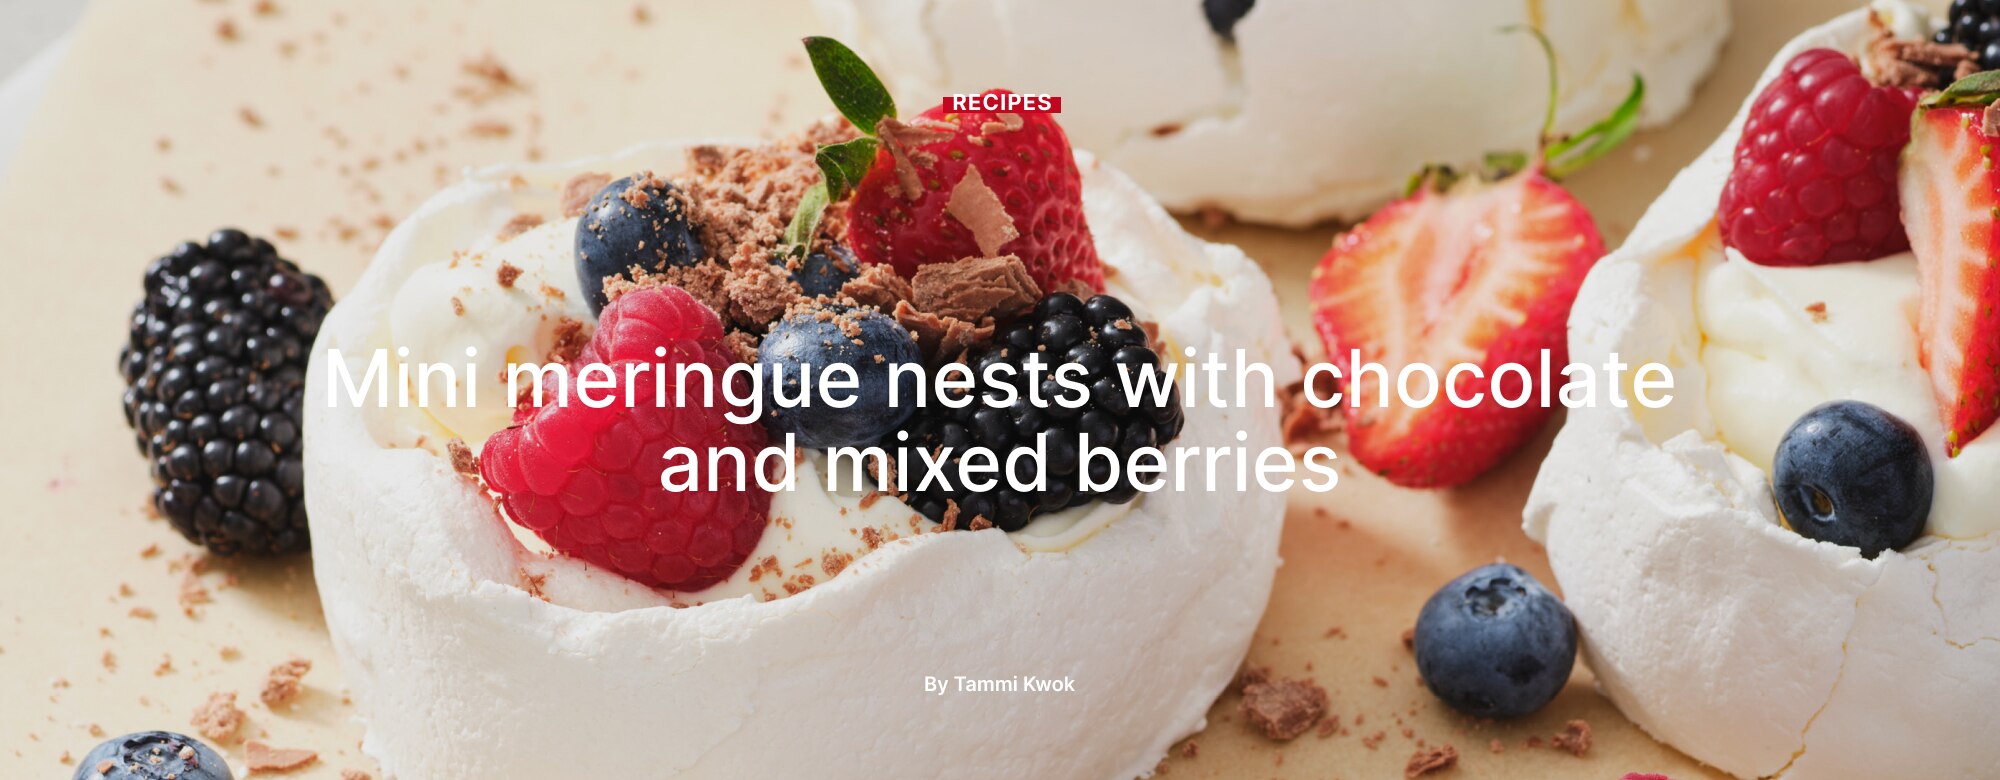 Mini meringue nests with chocolate and mixed berries